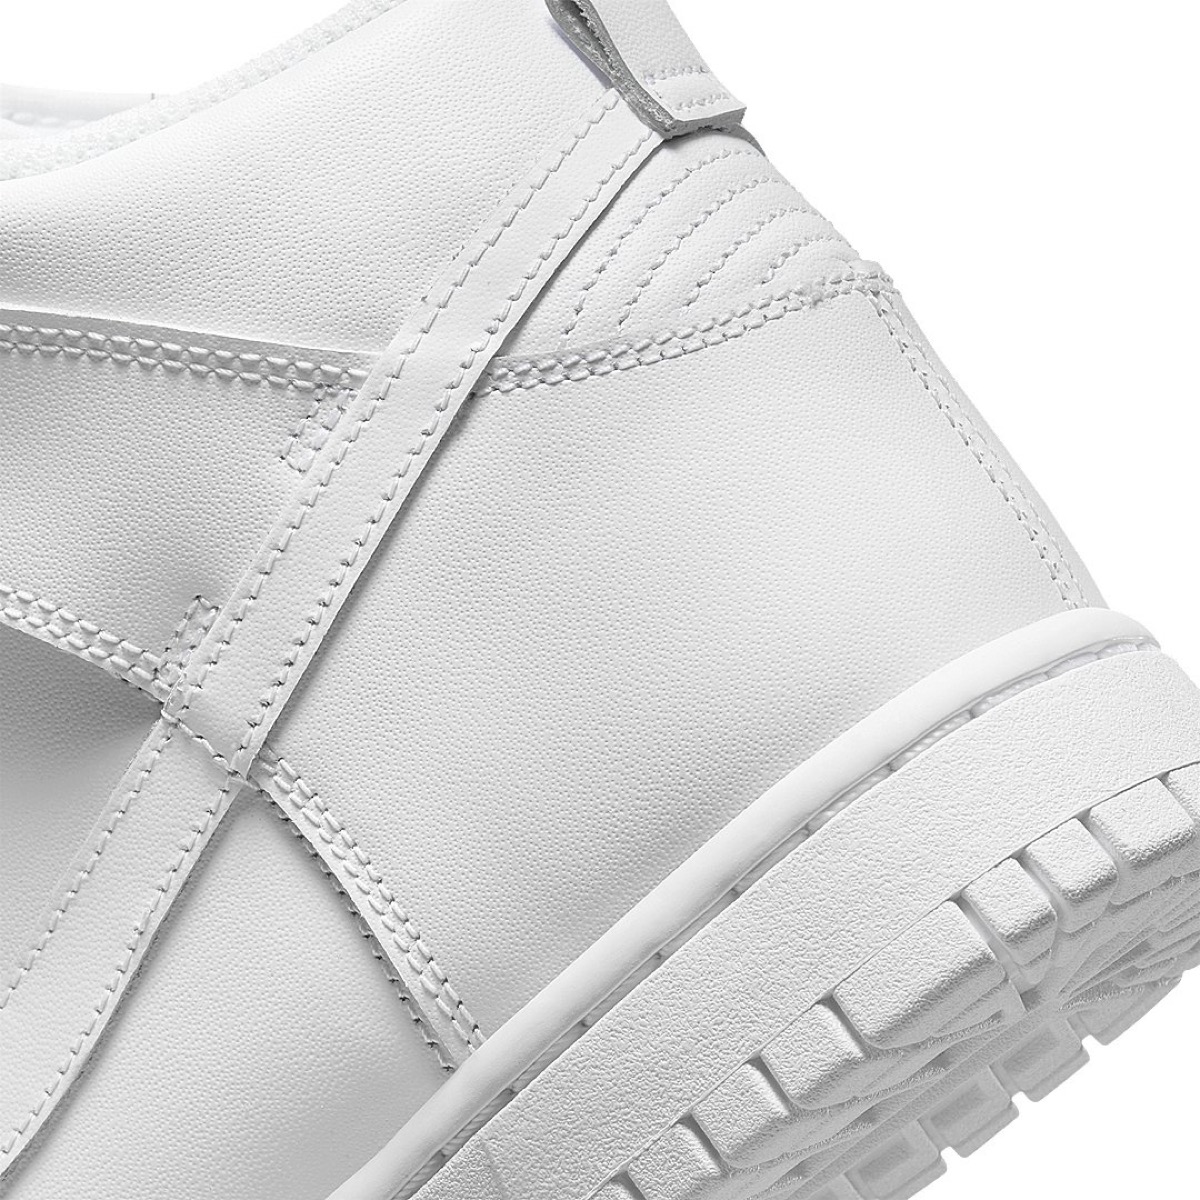 Nike Wmns Dunk High SE “White Pearl”が国内6月1日に発売予定 | UP TO